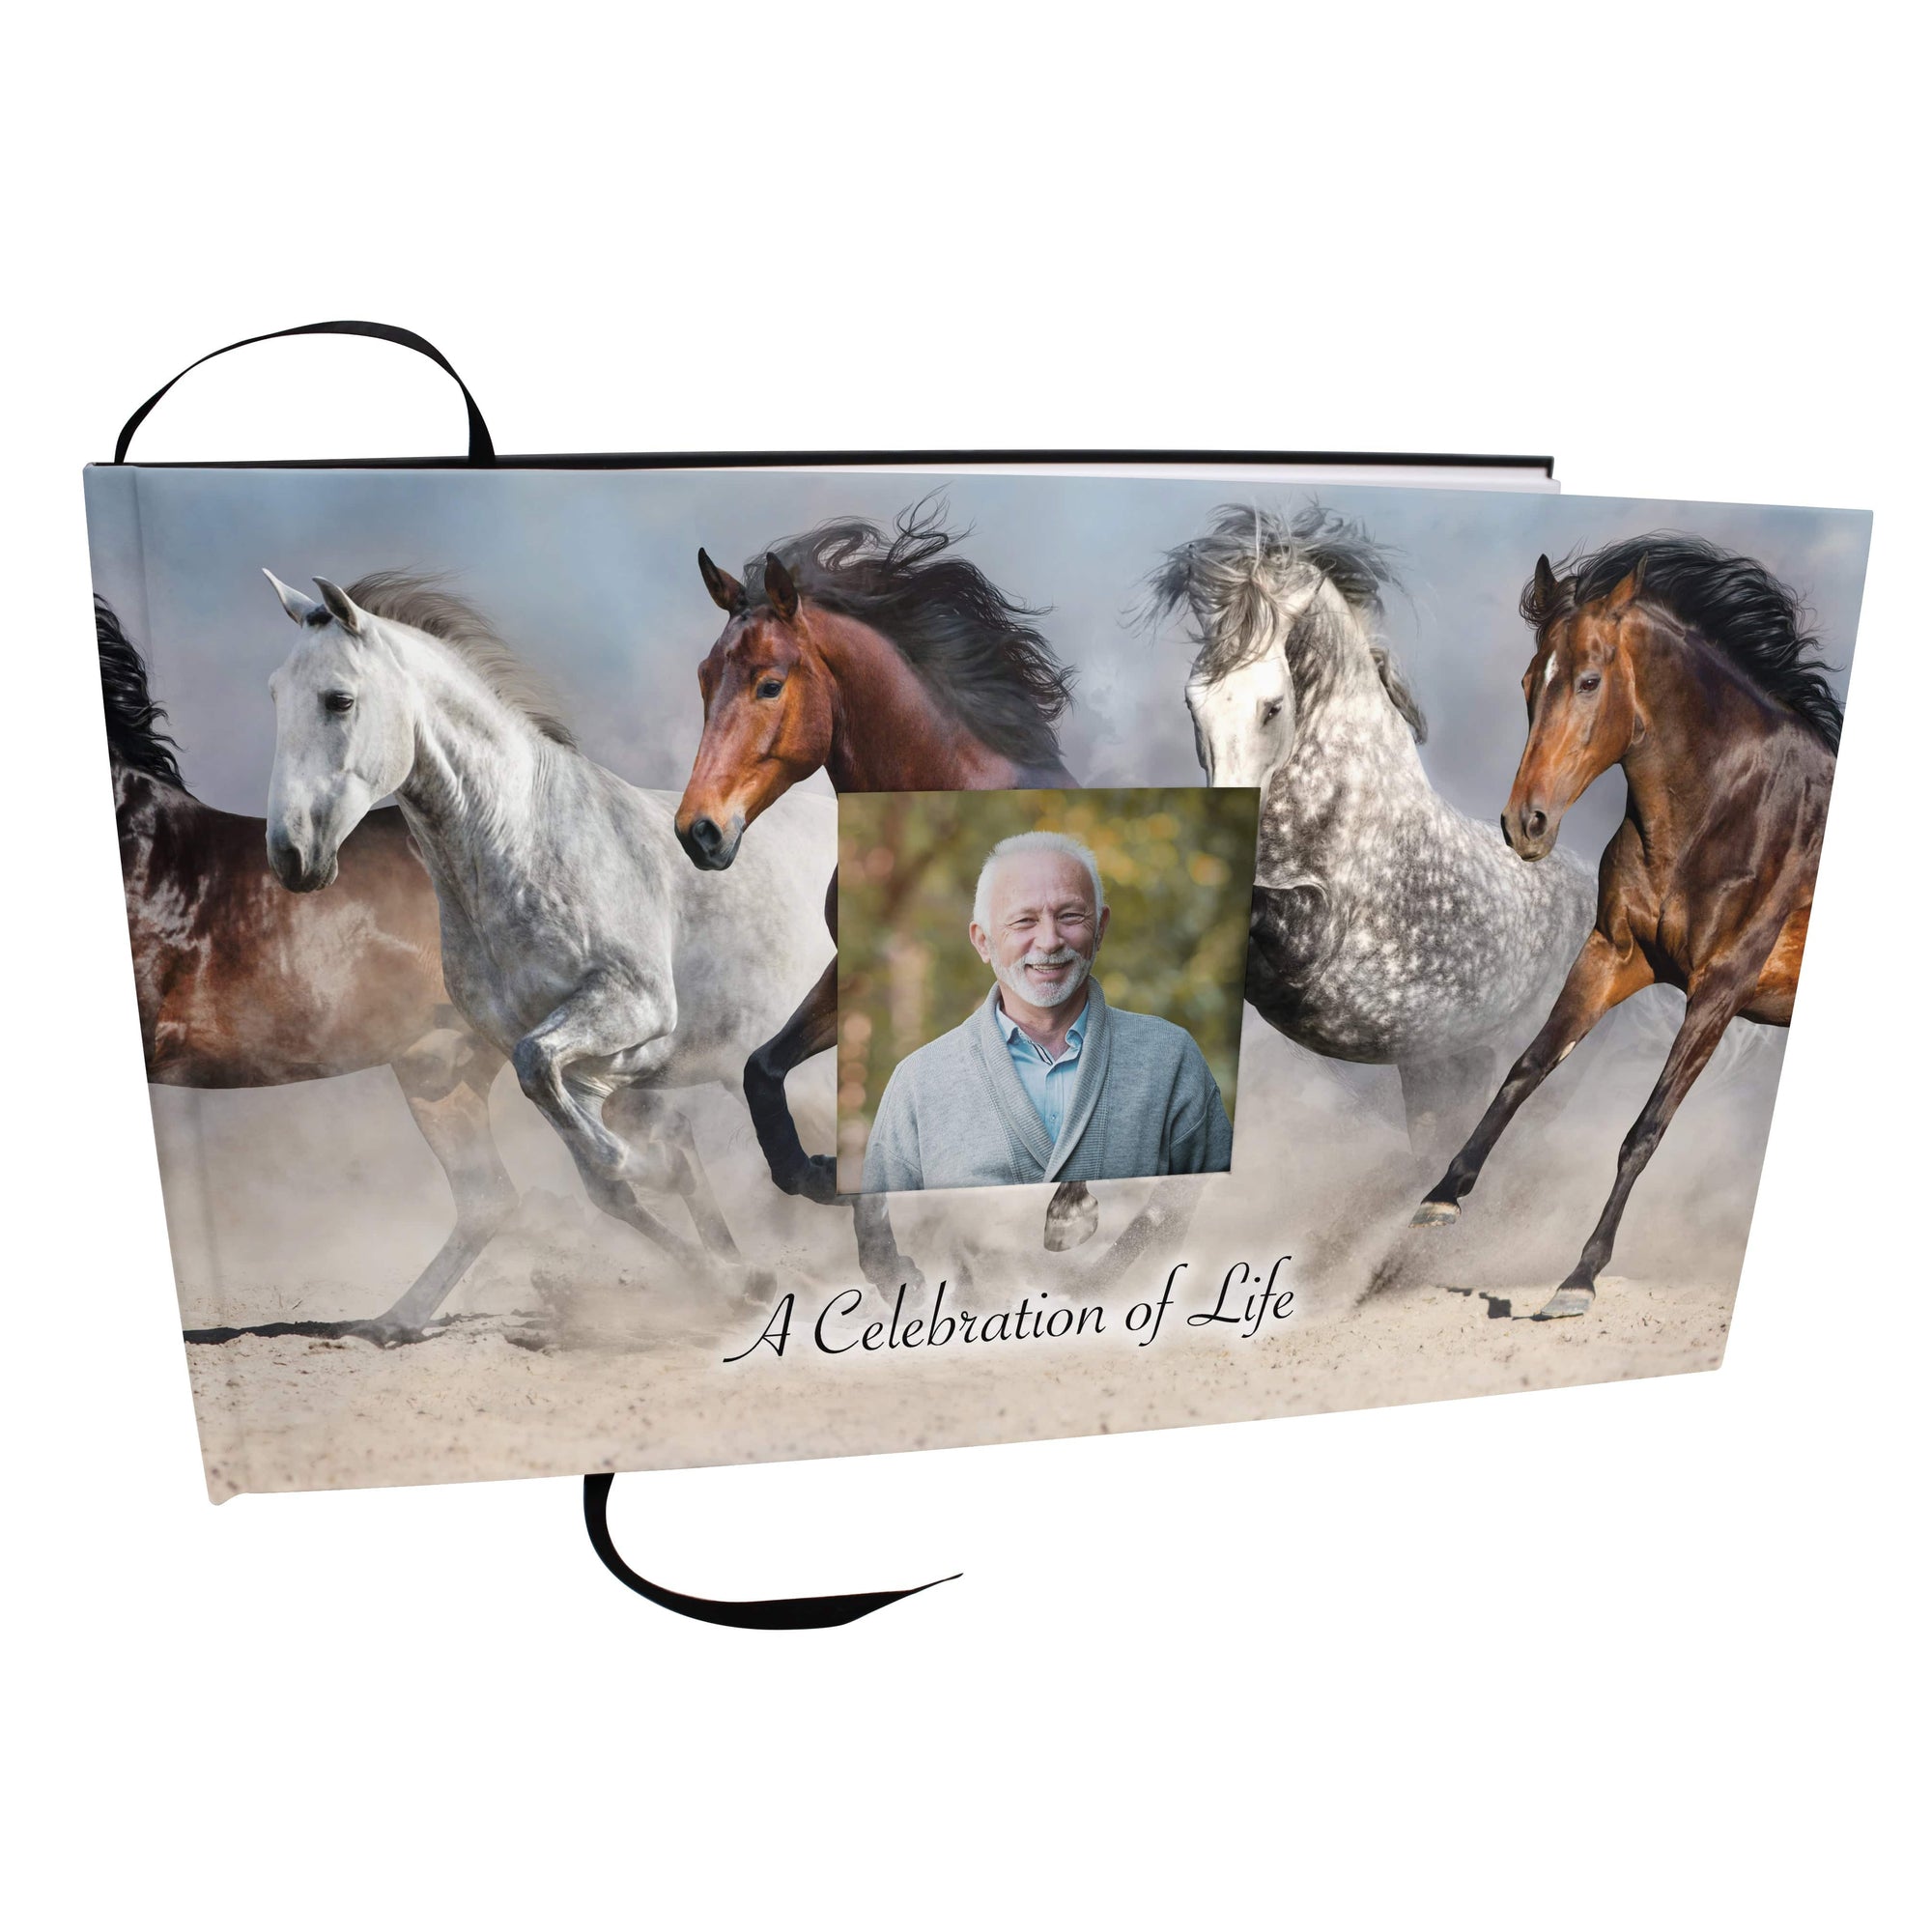 Commemorative Cremation Urns Wild Horses Matching Themed 'Celebration of Life' Guest Book for Funeral or Memorial Service